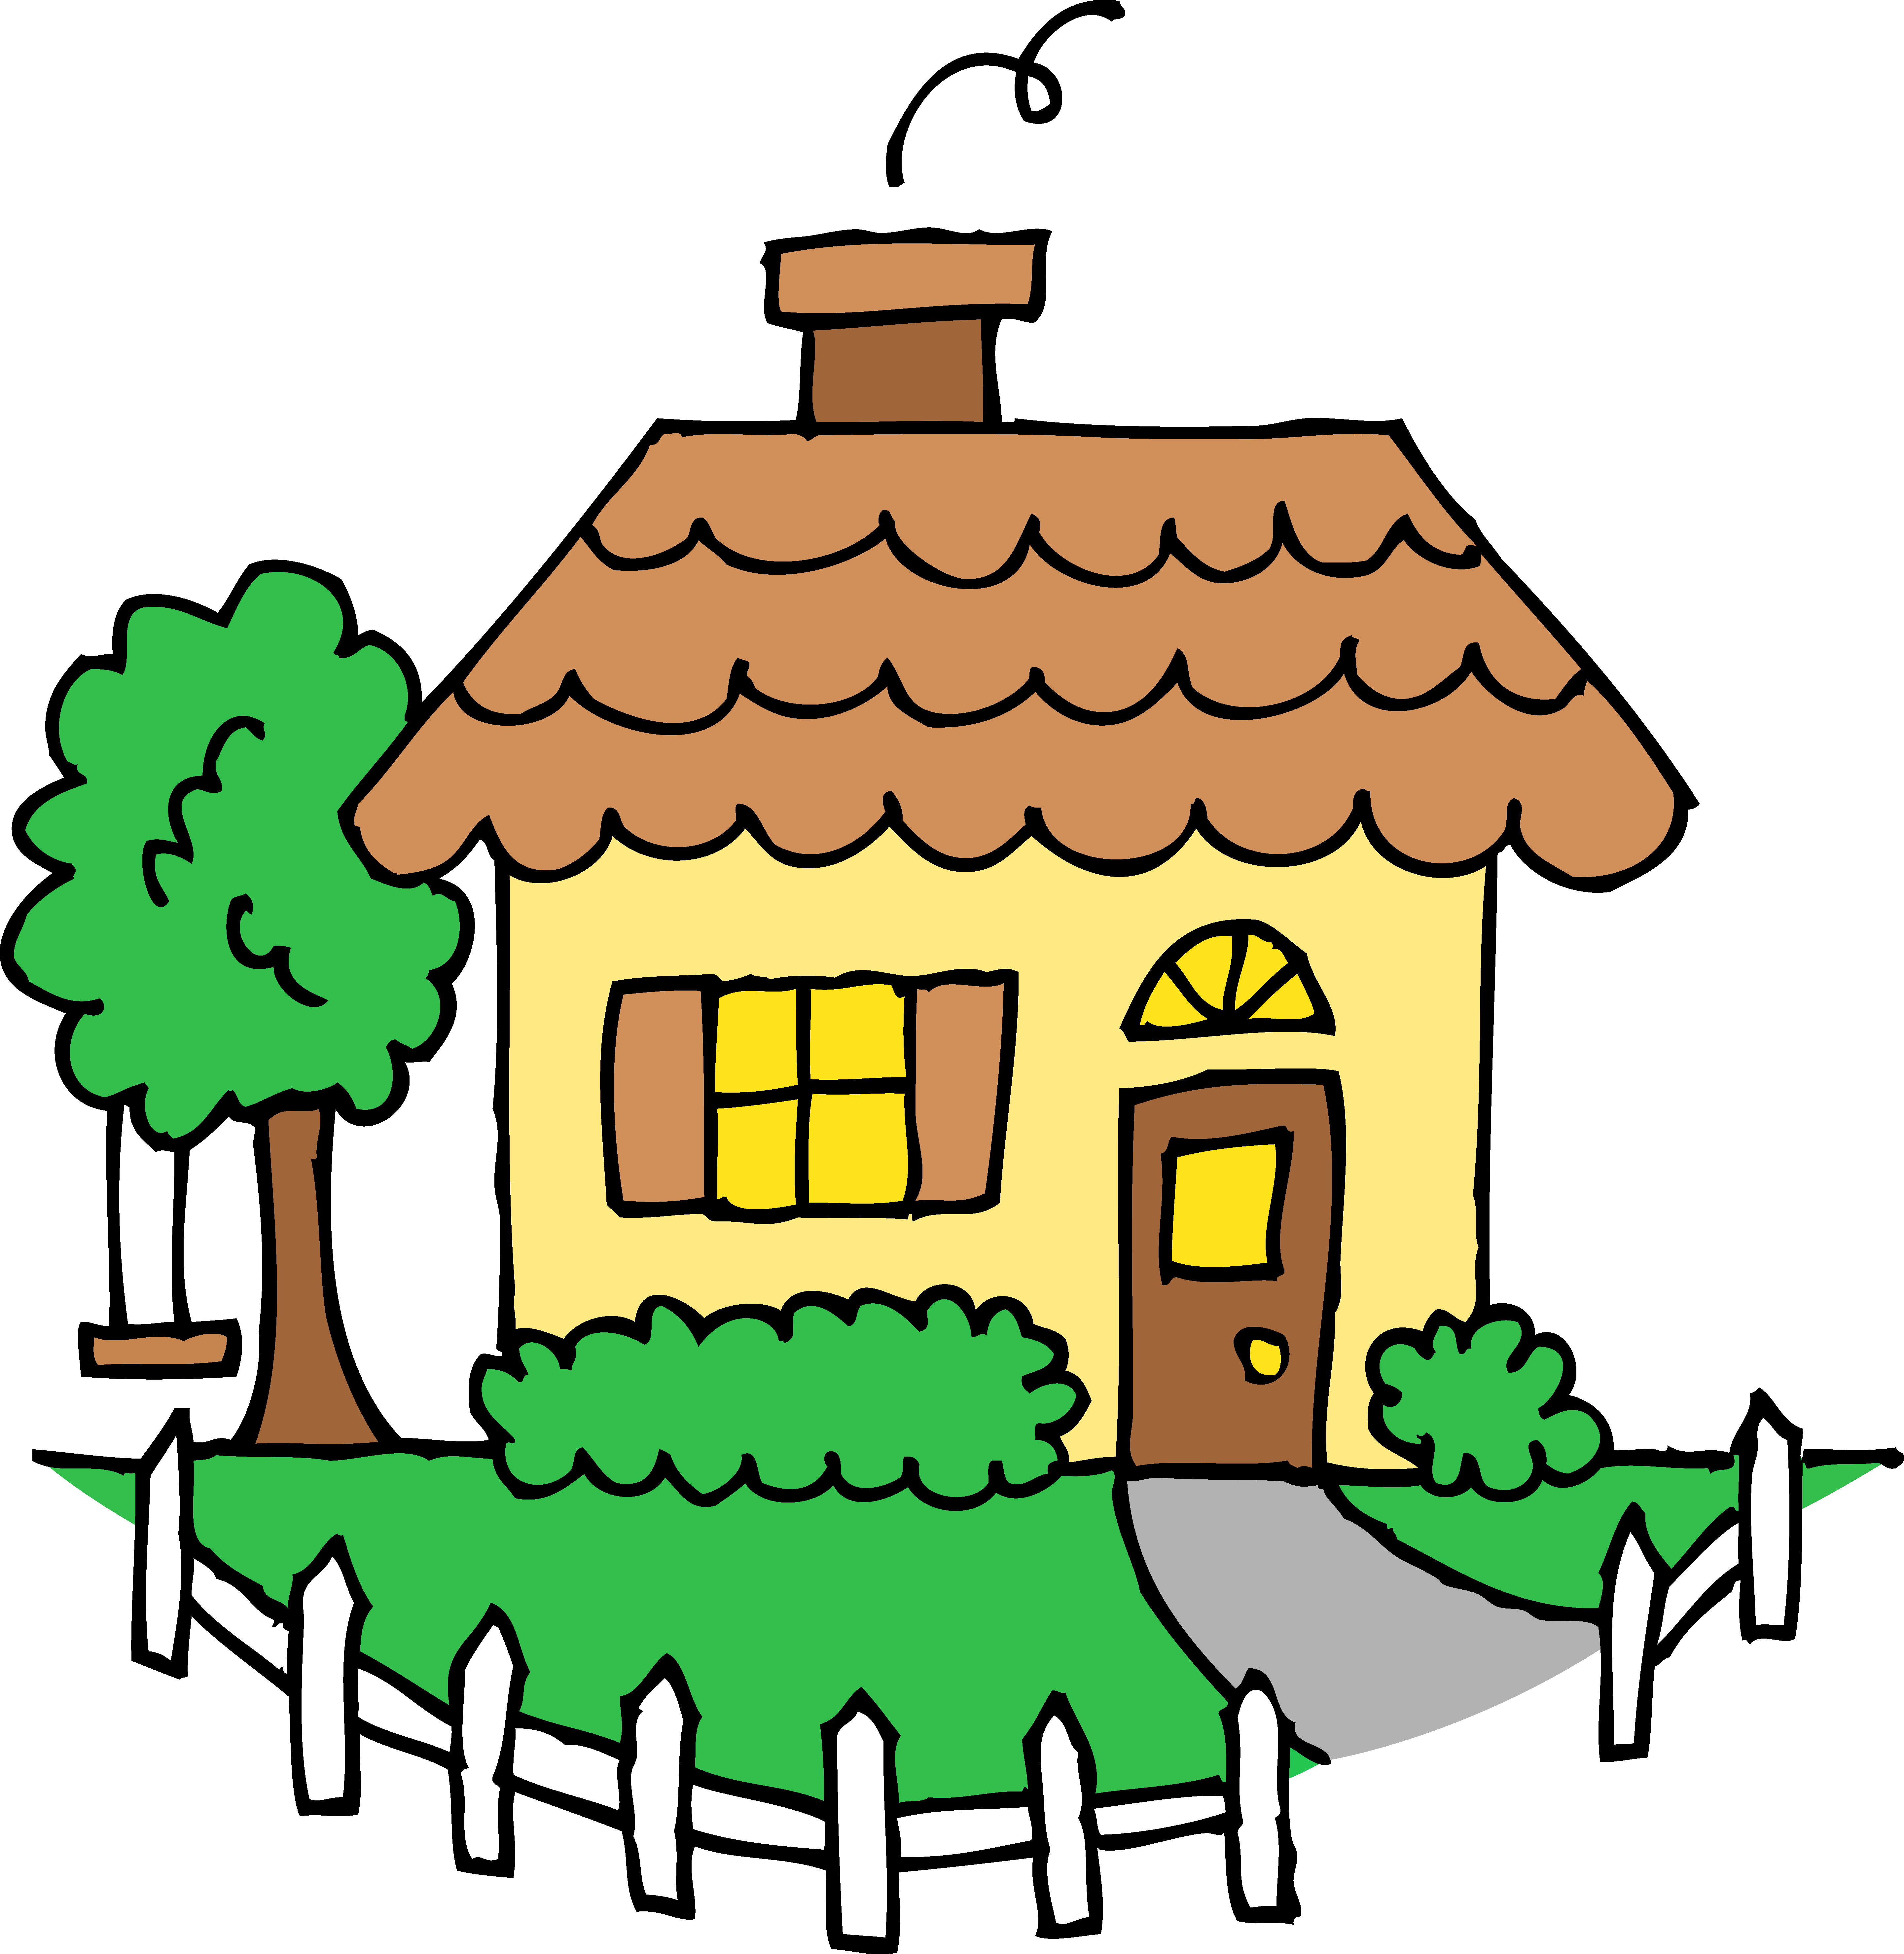 Free Images Of Houses - Clipart library. Houses Archives - Coloring Point - Coloring Point